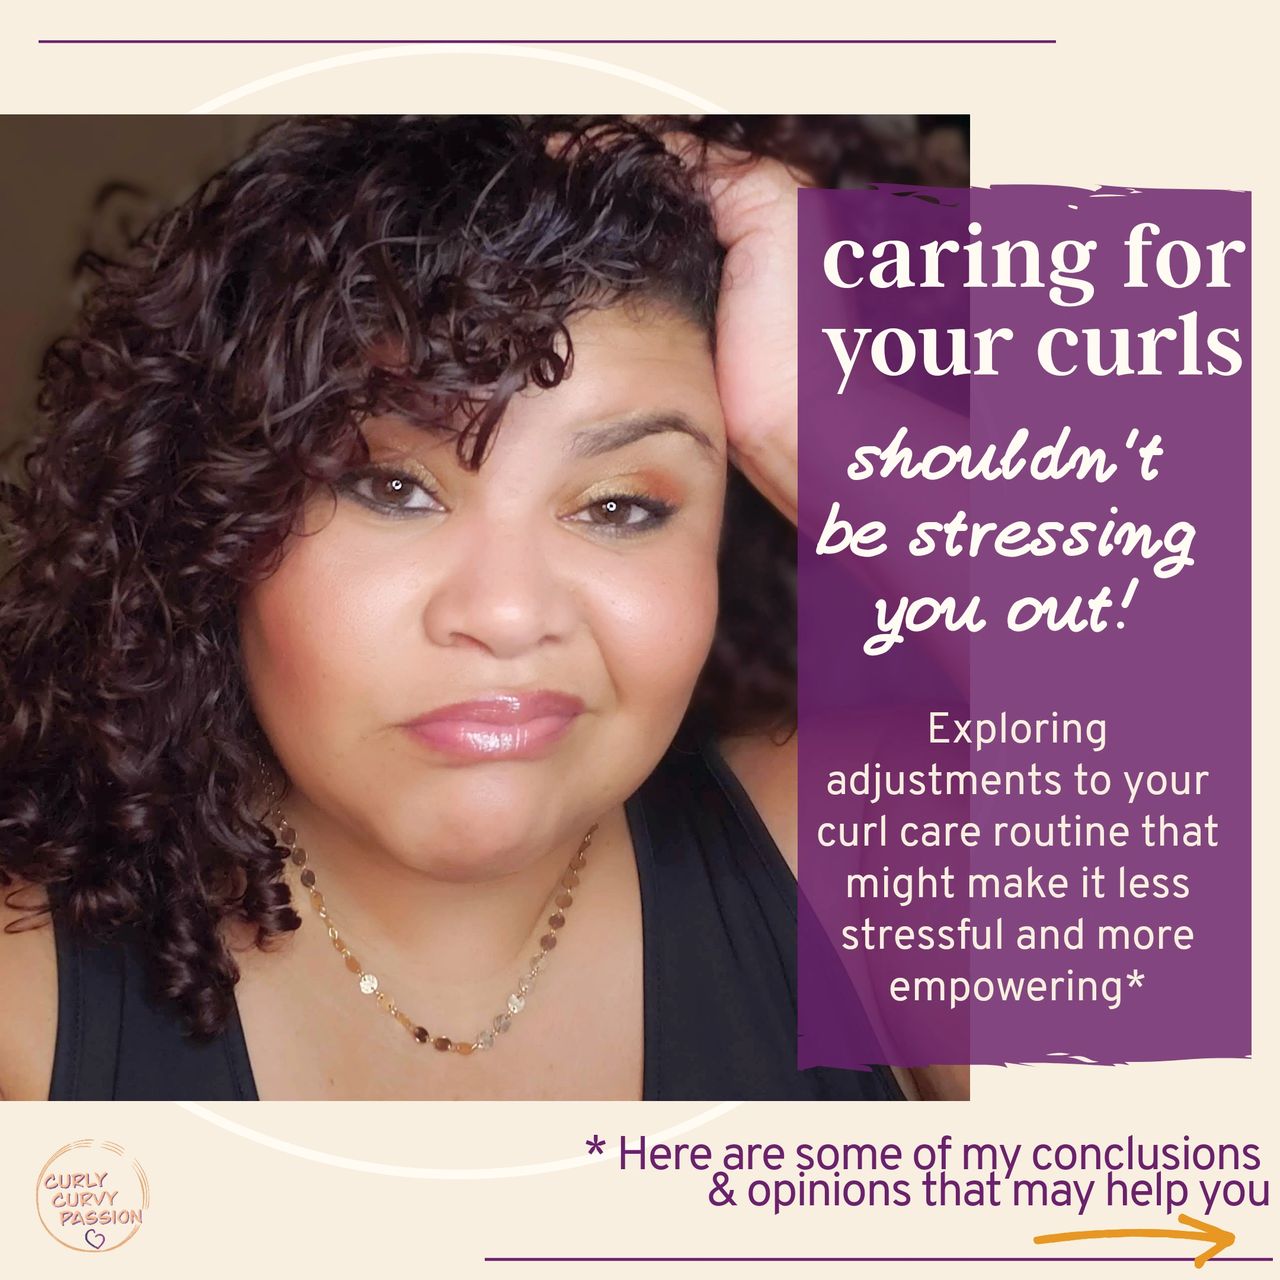 Caring For Your Curls Shouldn't be Stressing You Out!